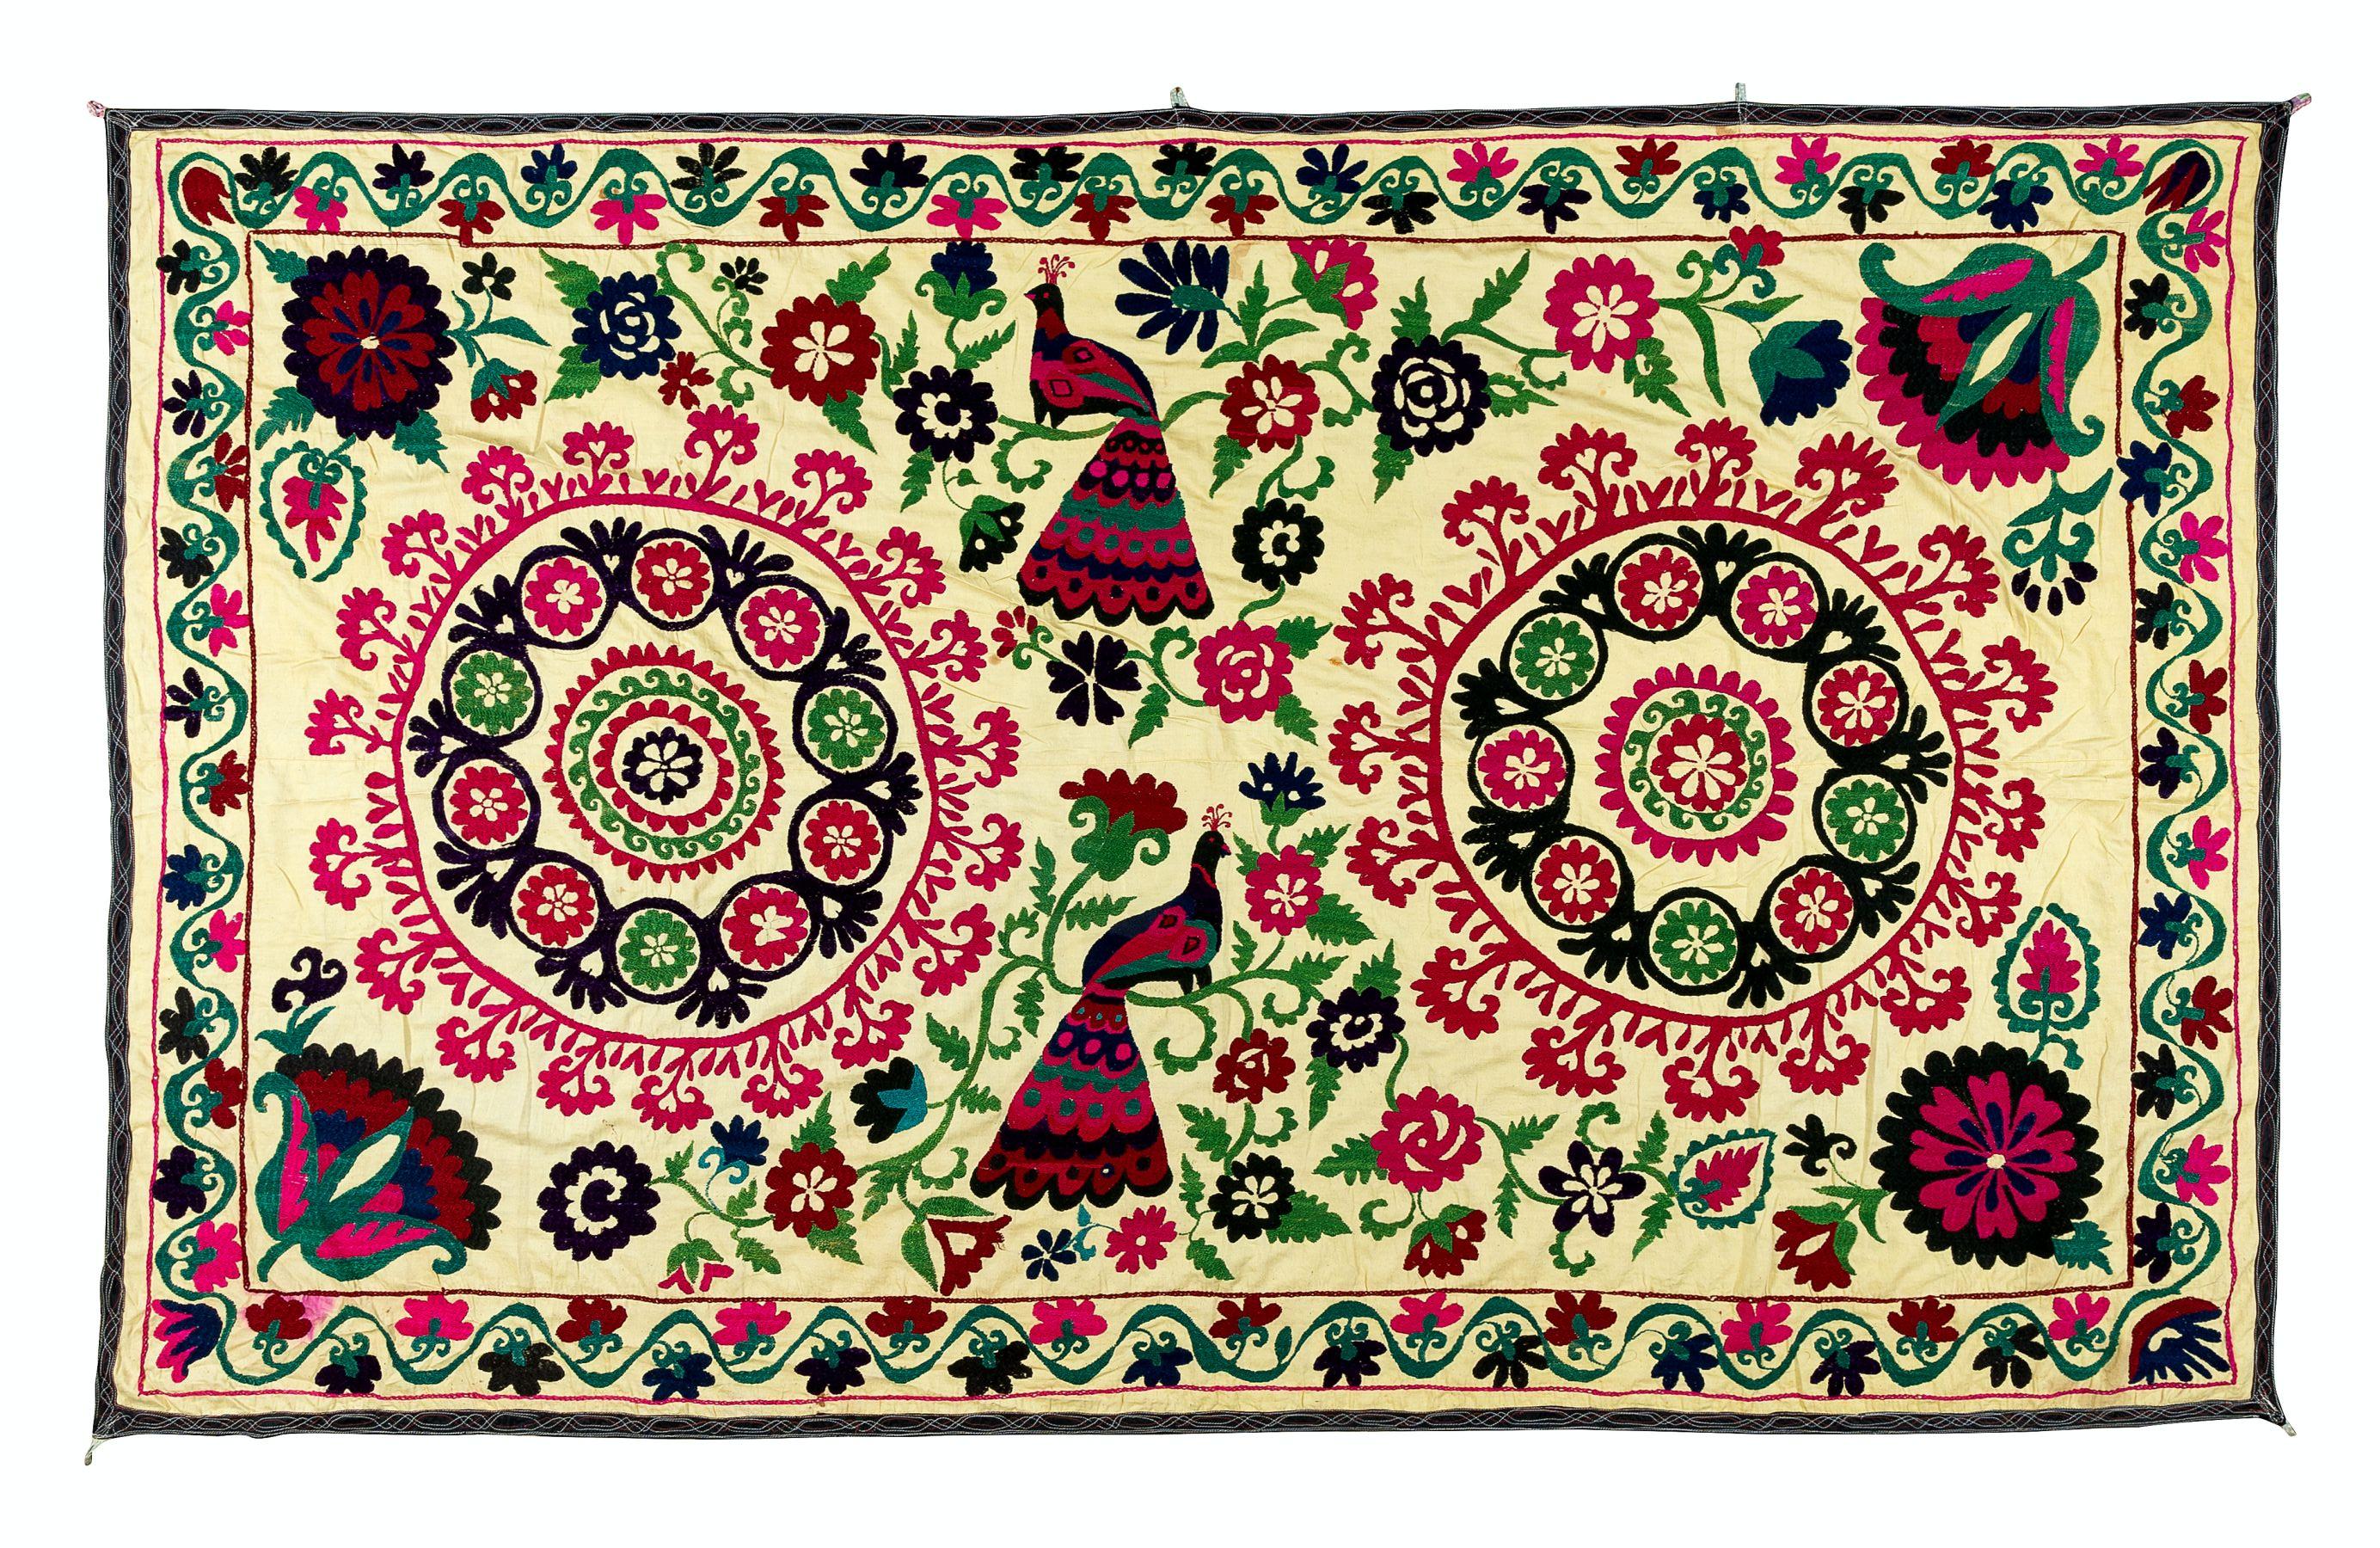 20th Century 4.7x7.4 Ft Uzbek Silk Hand Embroidery Suzani Bed Cover, Vintage Wall Hanging For Sale